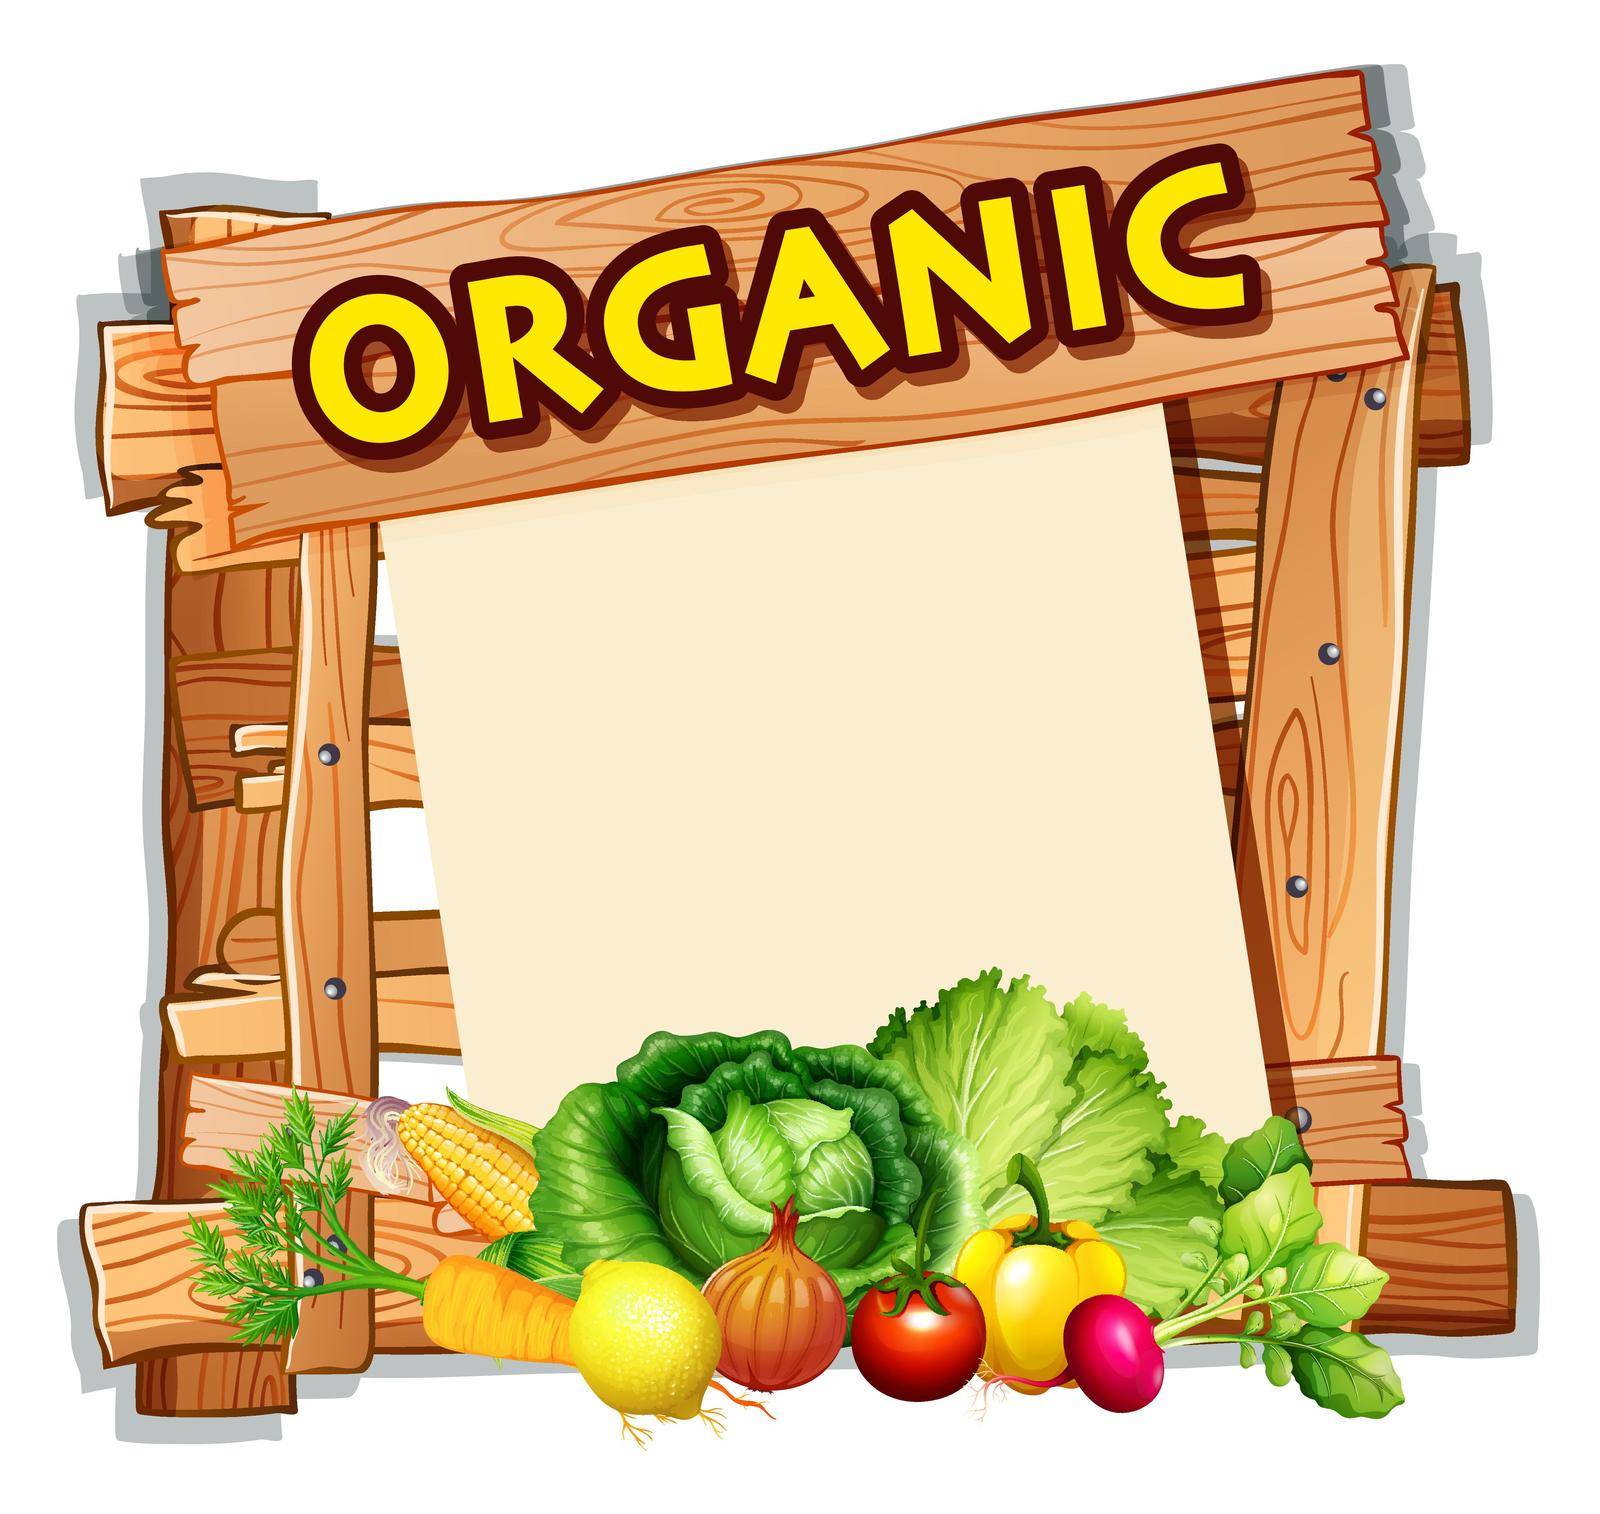 Organic sign with many vegetables illustration